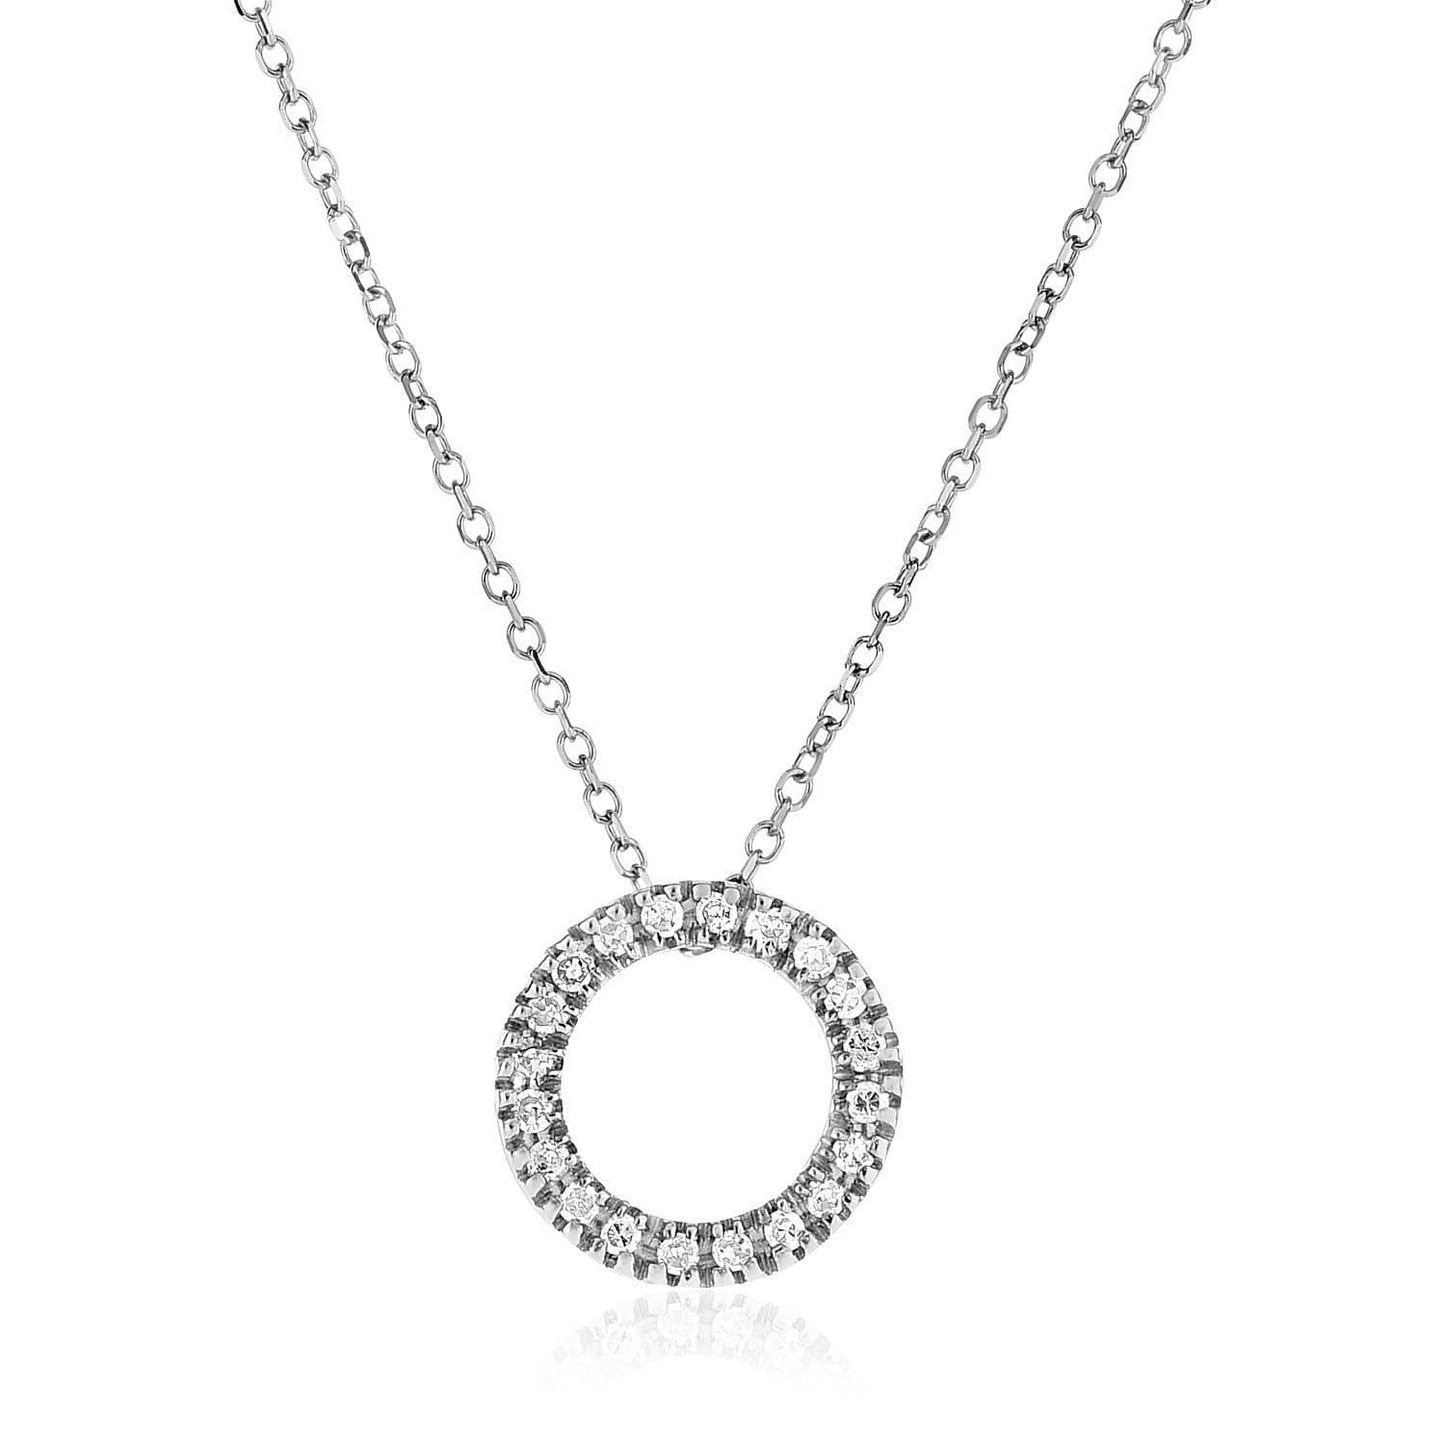 14K White Gold 18 inch Necklace with Gold and Diamond Open Ring Pendant (1/10 ct. tw.)